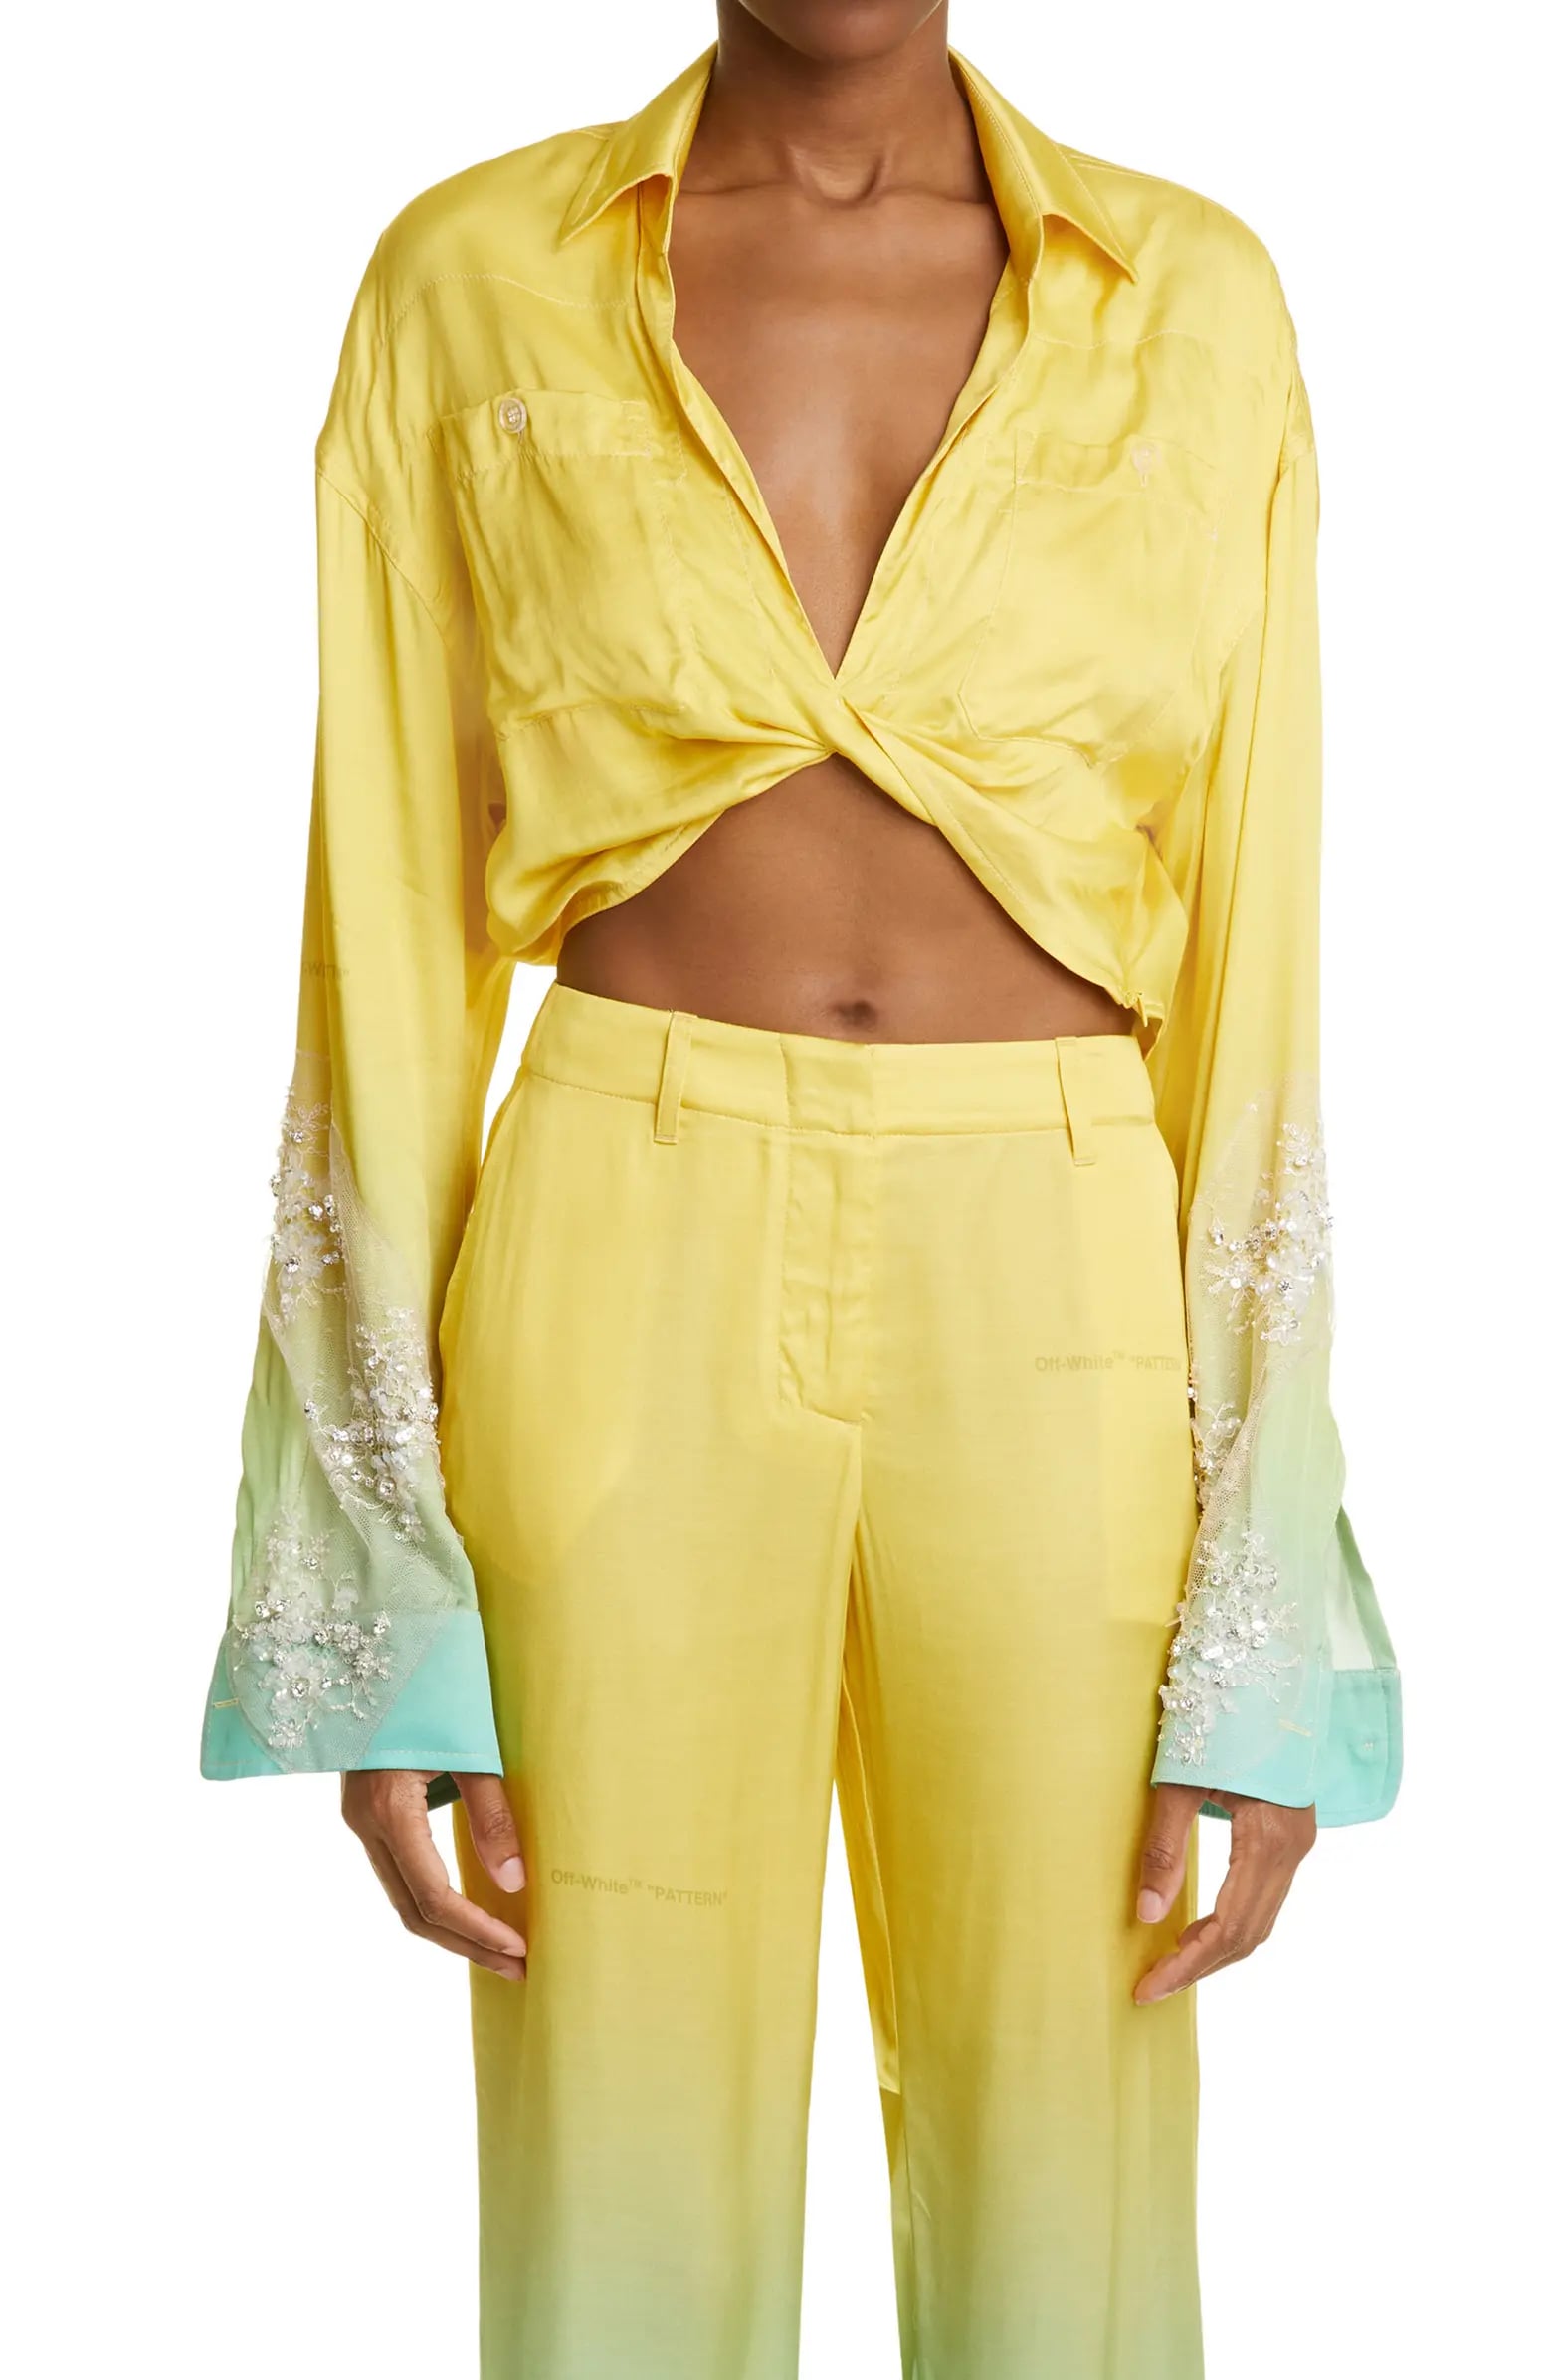 Ambiance Apparel Ambiance Yellow Lace Cropped Top - $10 (52% Off Retail) -  From Nayelli